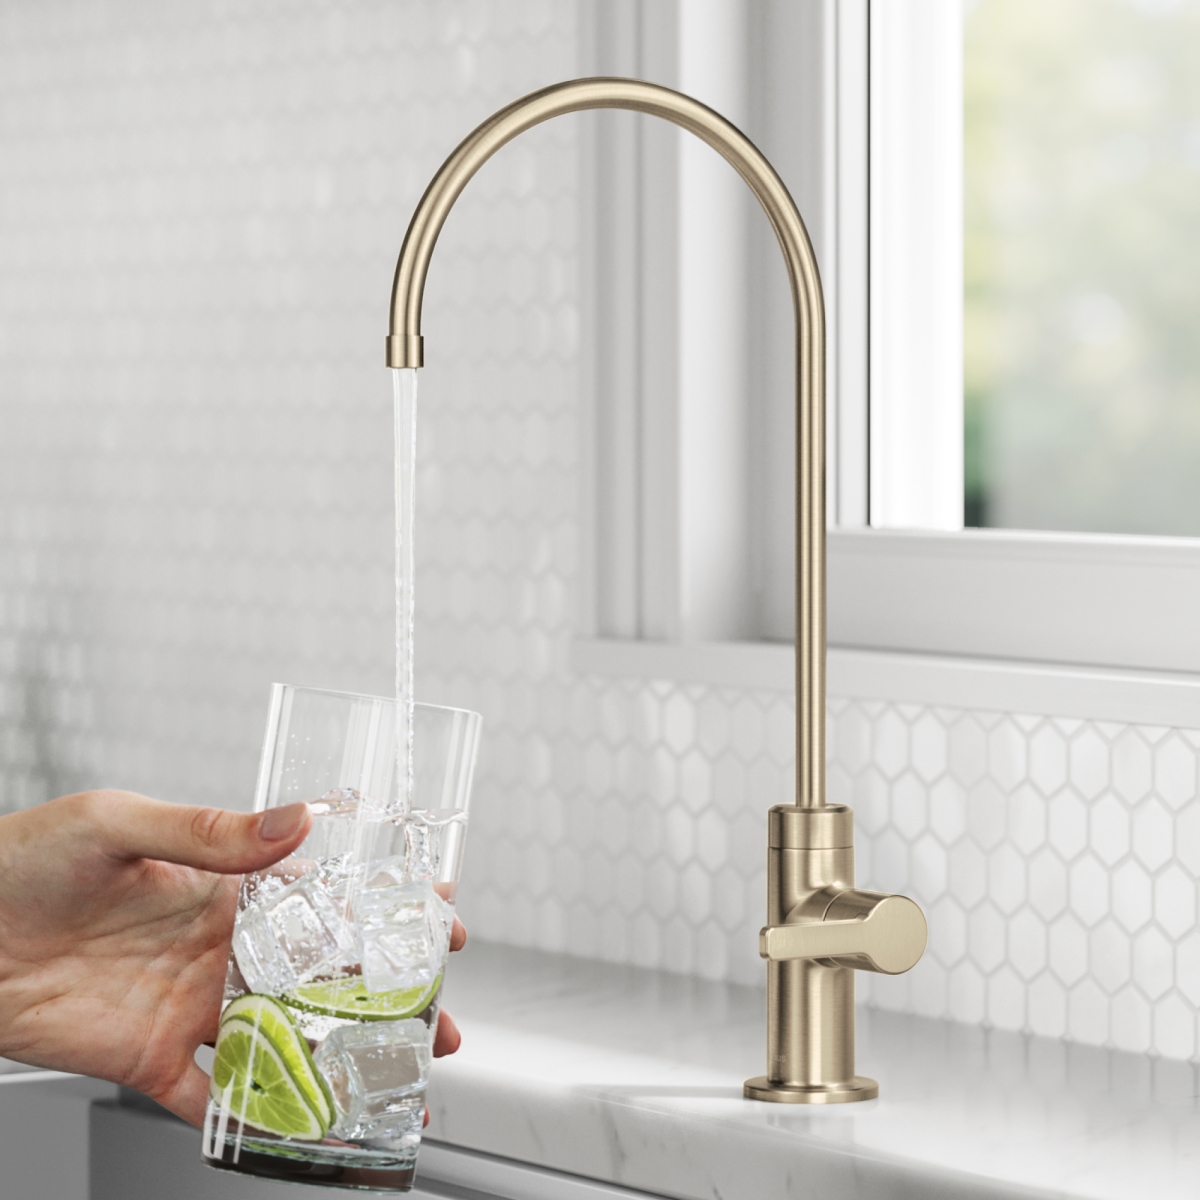 Picture of Kraus FF-103SFACB Oletto Single Handle Drinking Water Filter Faucet for Reverse Osmosis or Water Filtration System - Spot-Free Antique Champagne Bronze